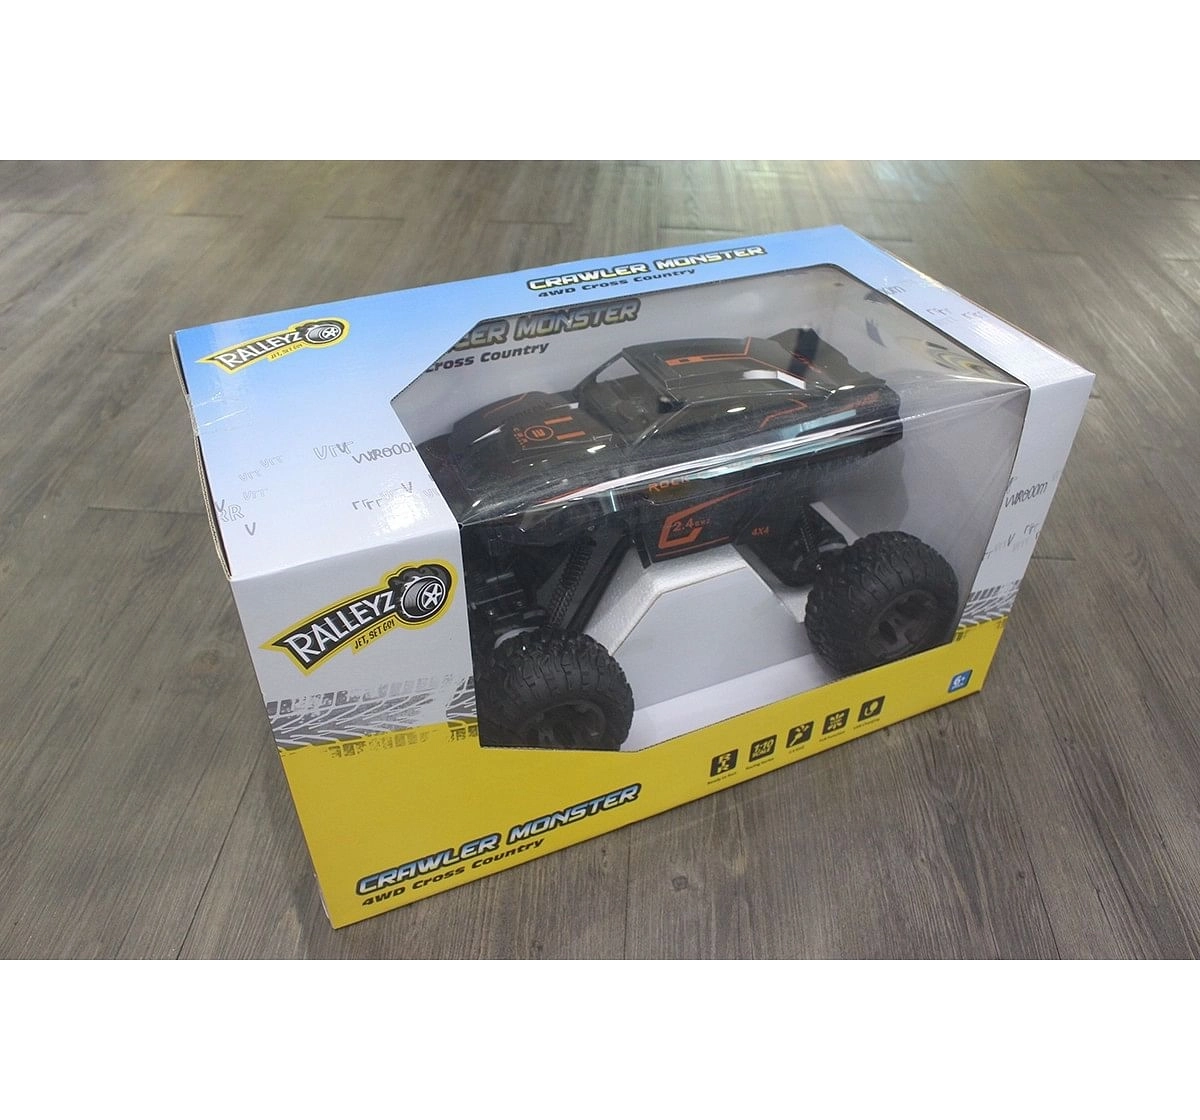 Ralleyz 1:10 2.4G REMOTE CONTROL CRAWLER MONSTER WITH ADJUSTABLE CHASSIS age 8Y+ 